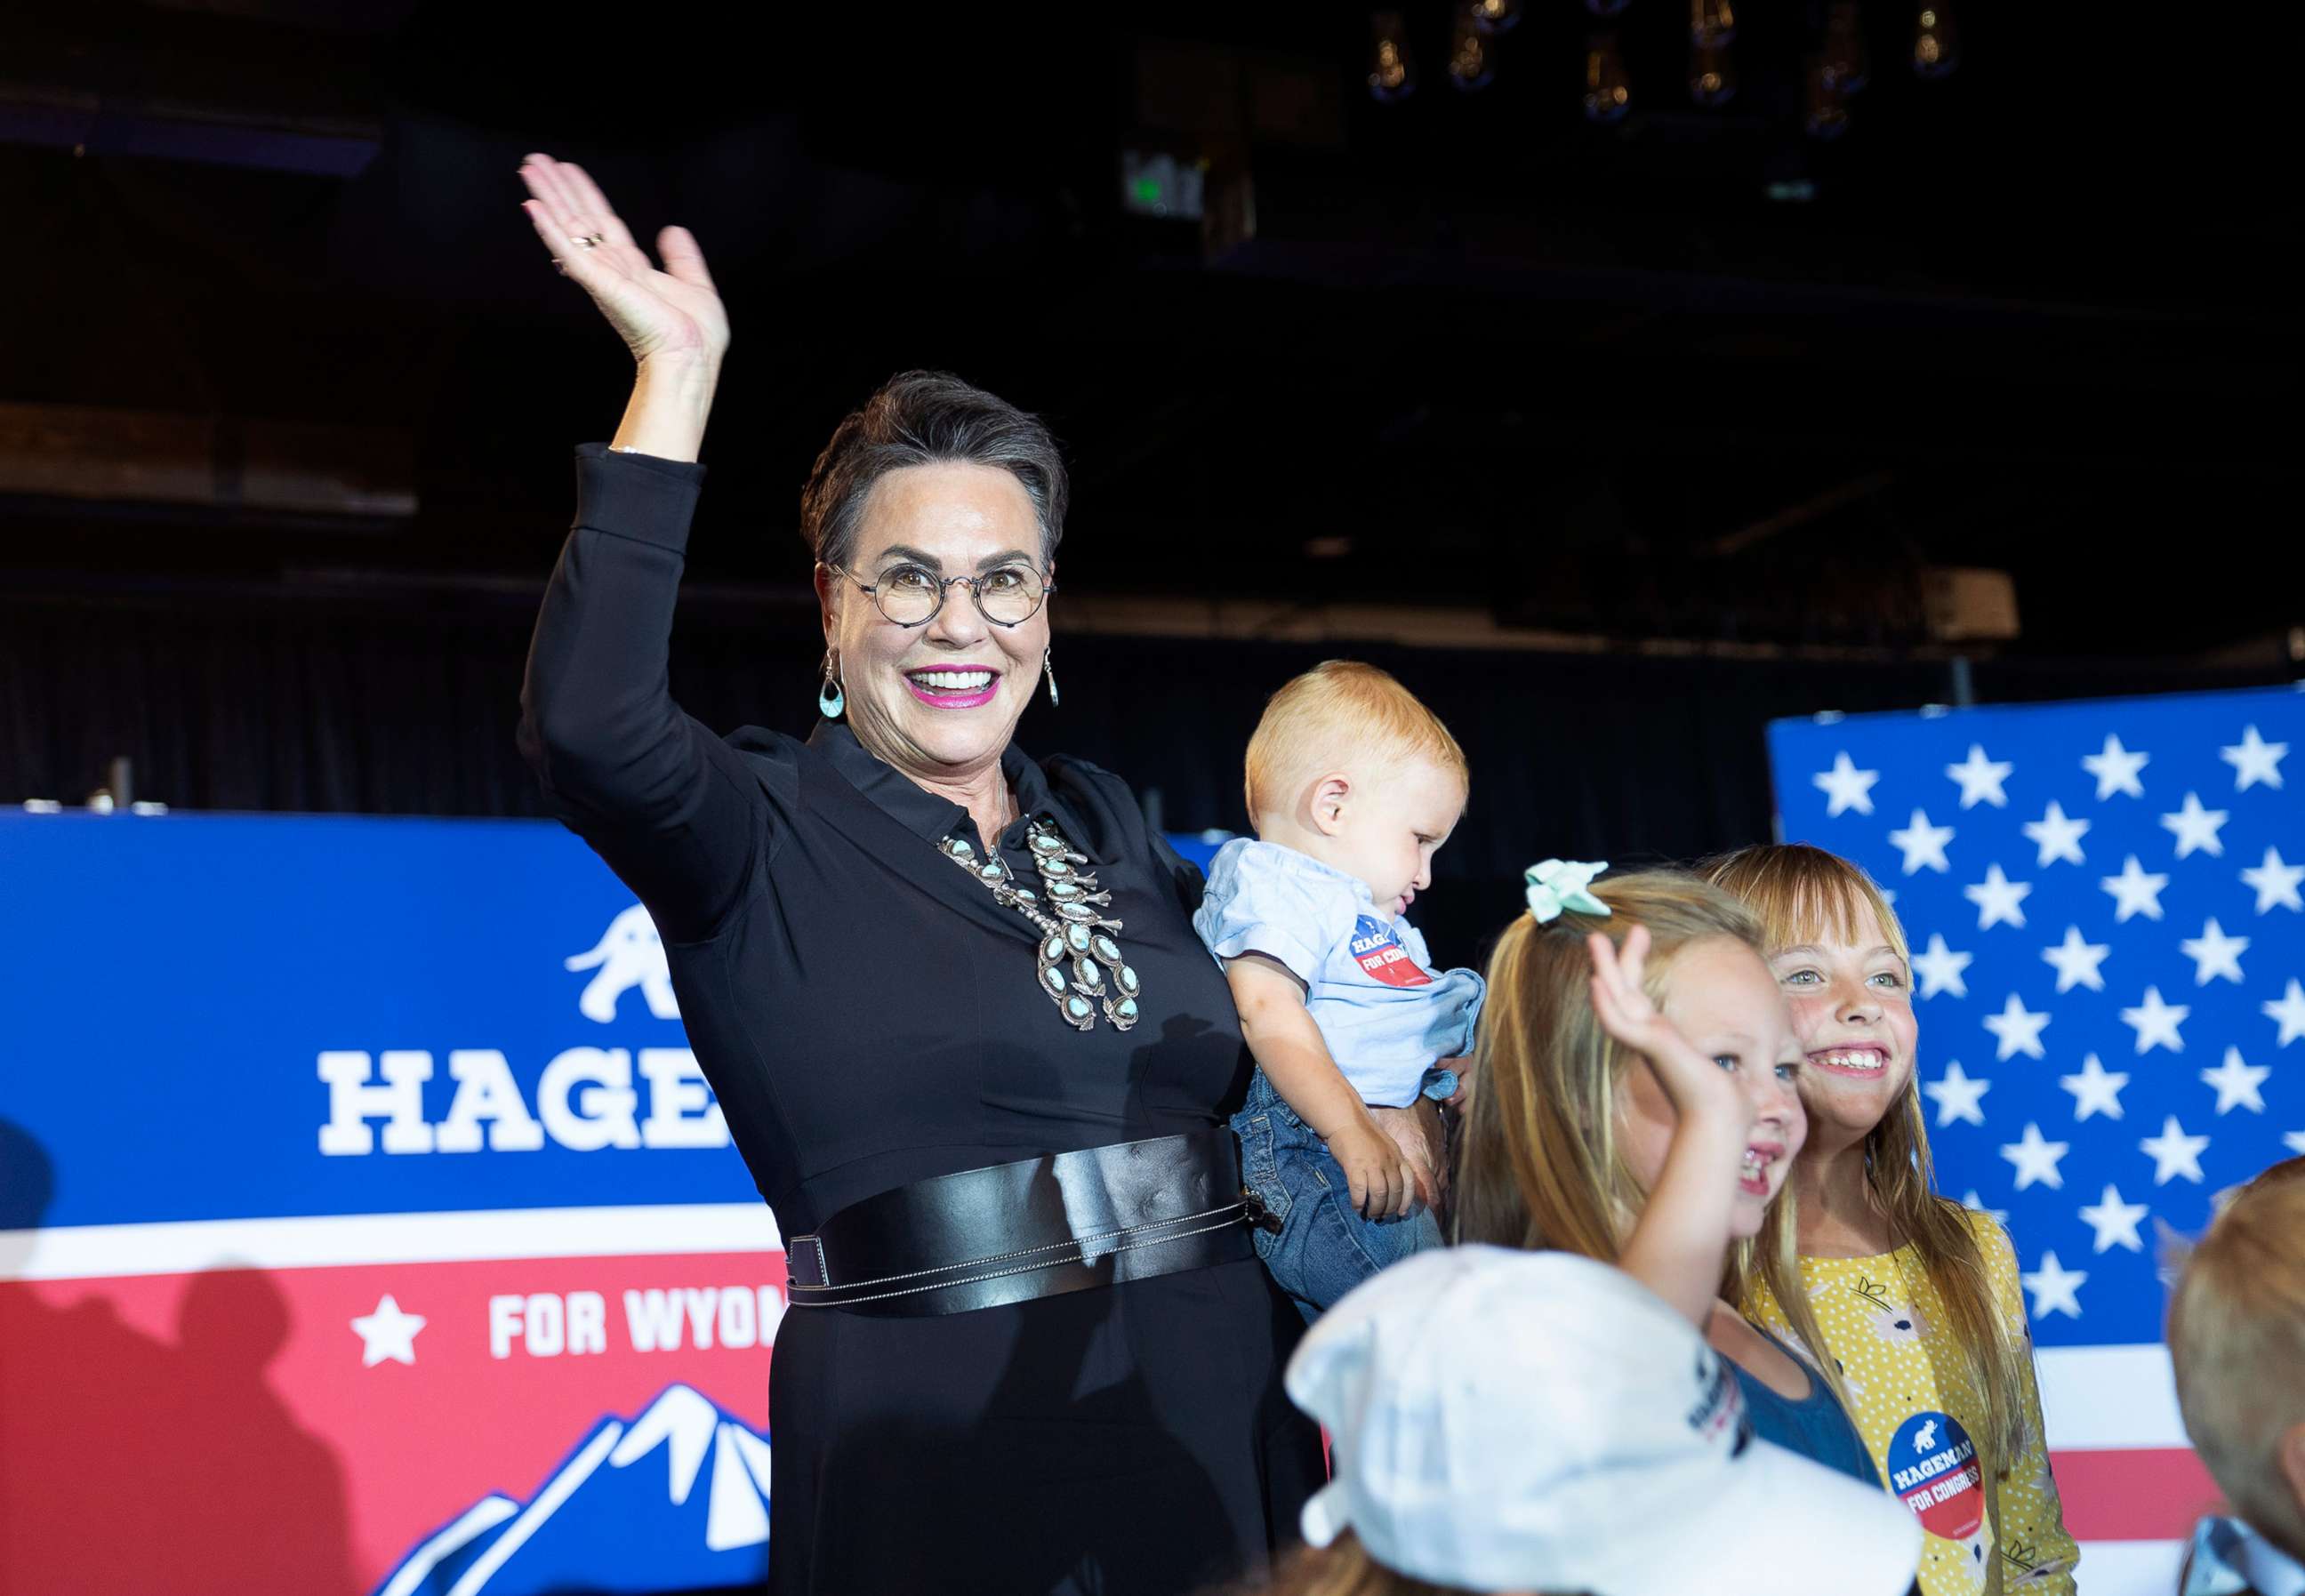 PHOTO: Wyoming Republican congressional candidate Harriet Hageman waves as she takes a picture with children during a primary election night party, Aug. 16, 2022, in Cheyenne, Wyo.